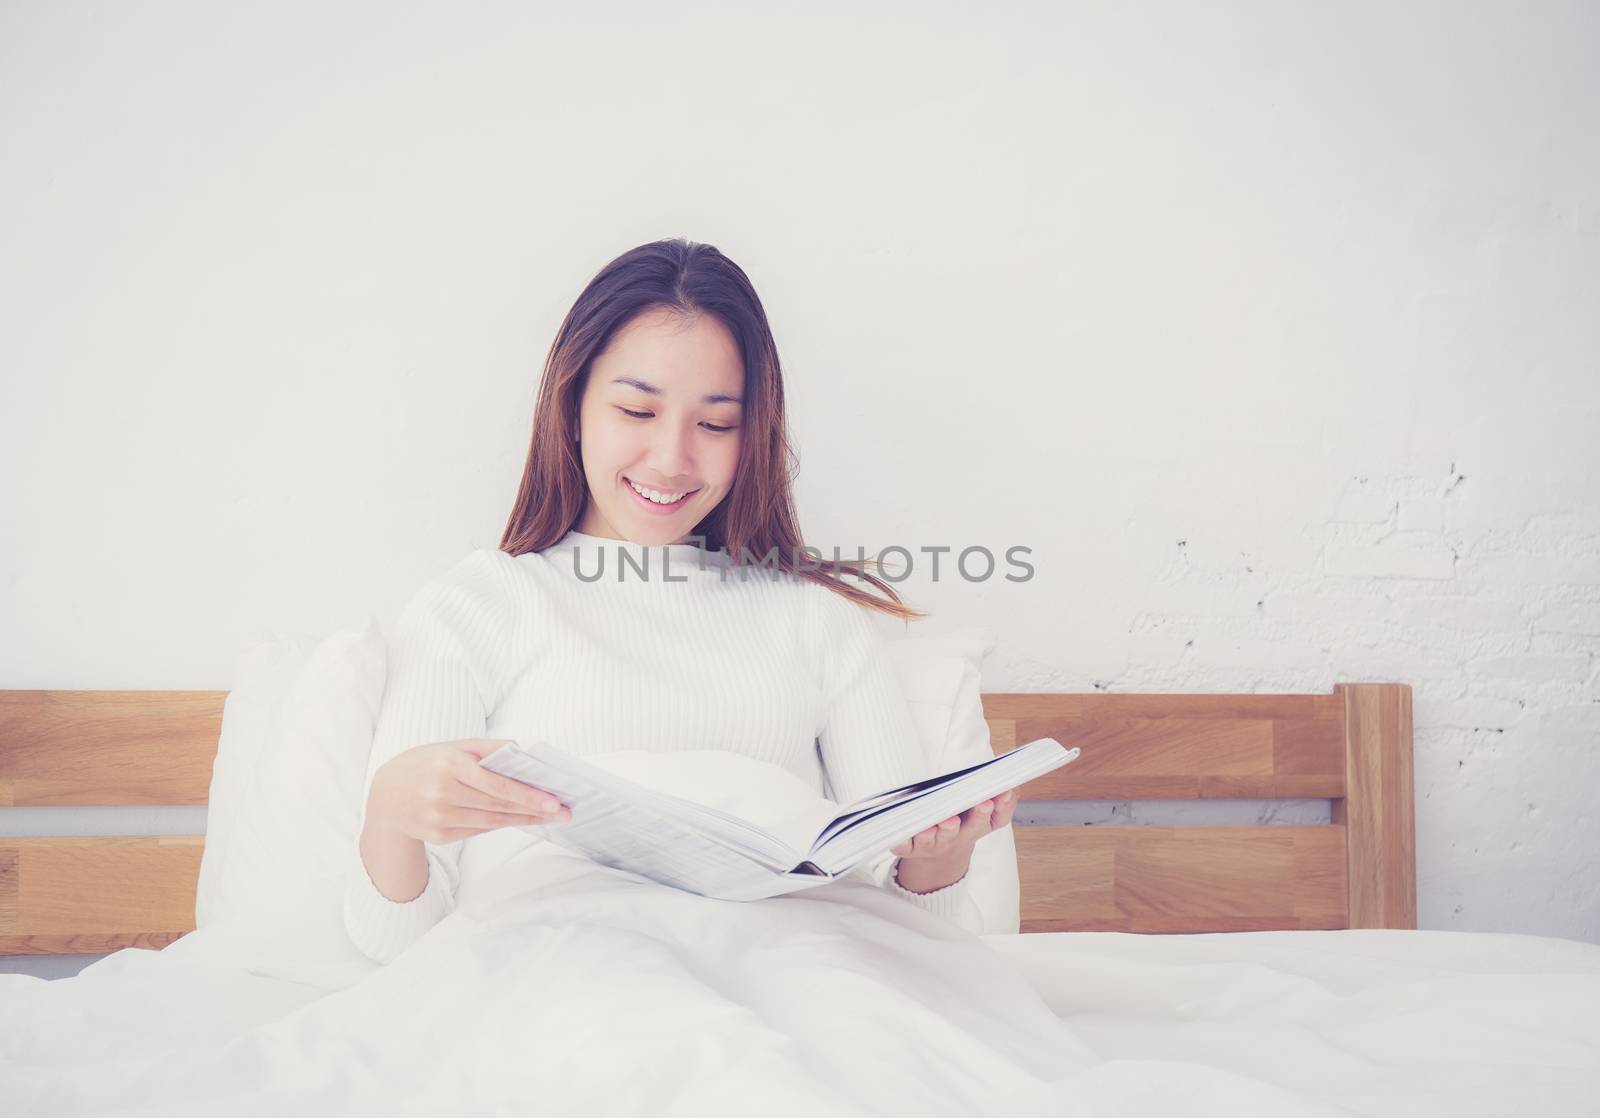 Asian woman reading a book and smiling in bedroom. lifestyle concept.